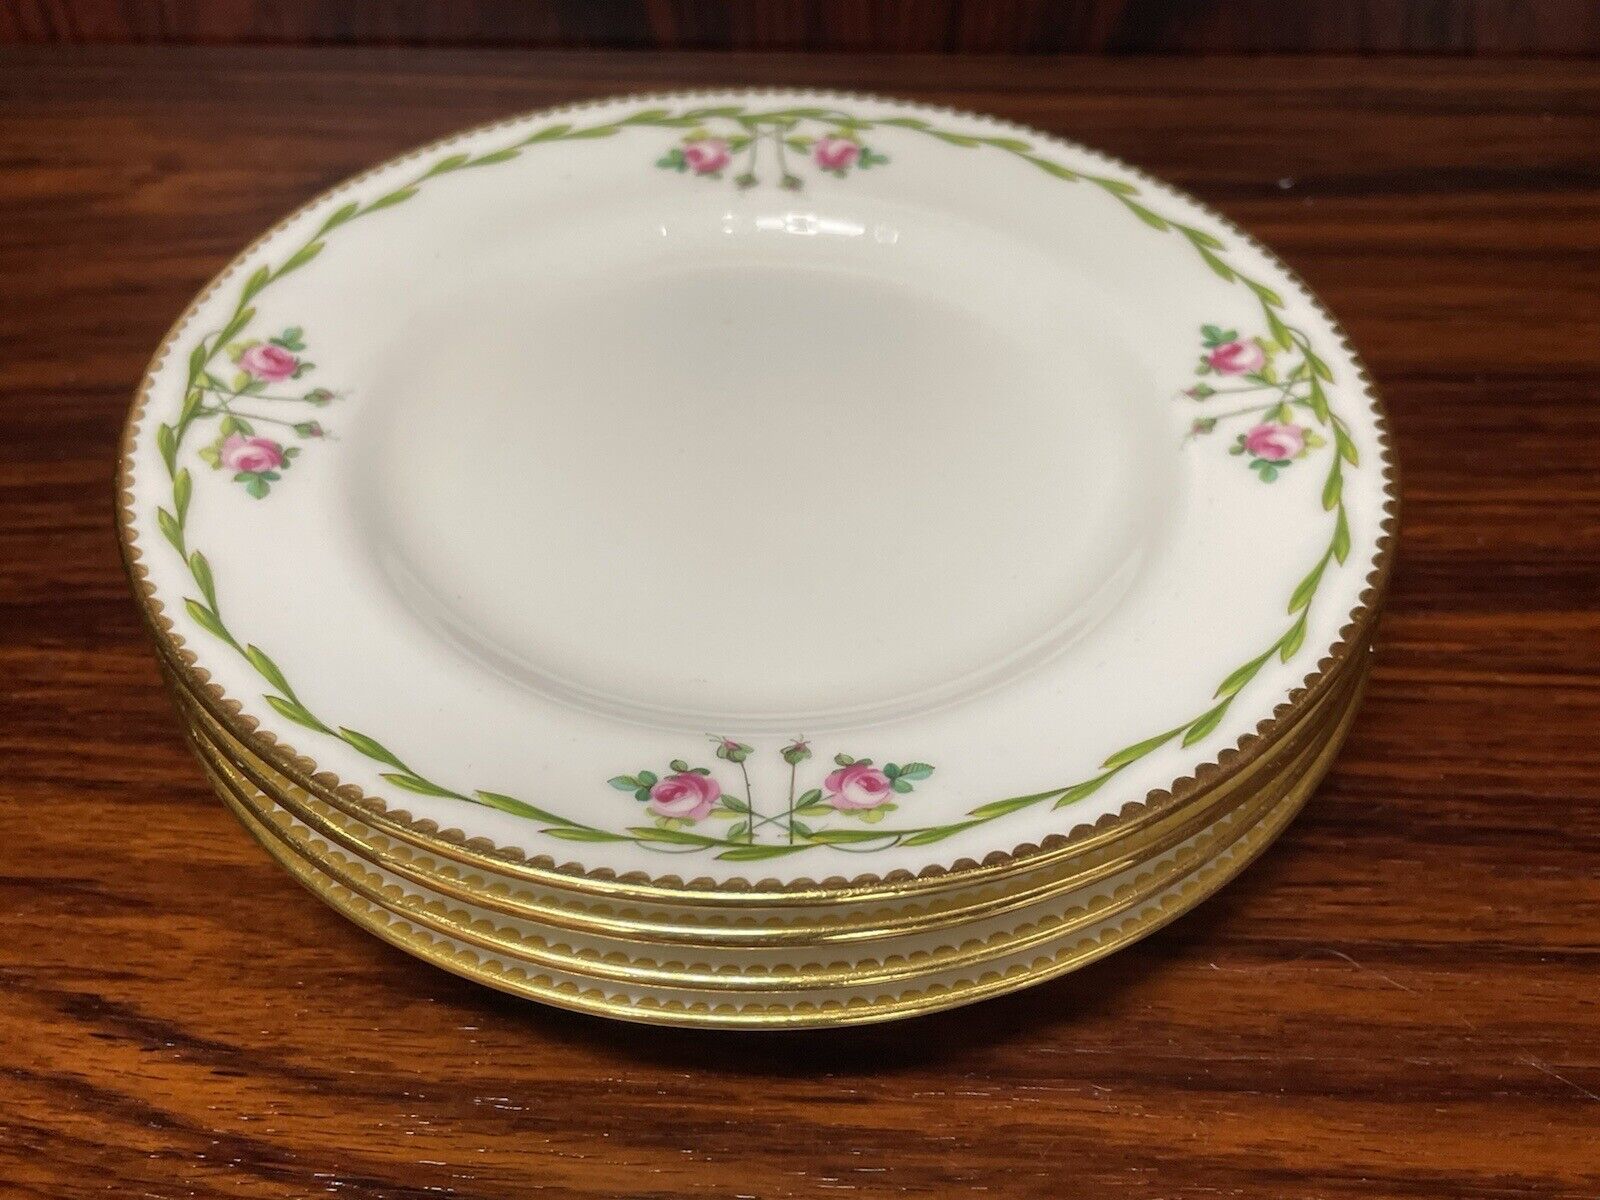 Set of (4) Antique Minton H1987 Hand Painted Floral Pink Roses Bread Plates 6”